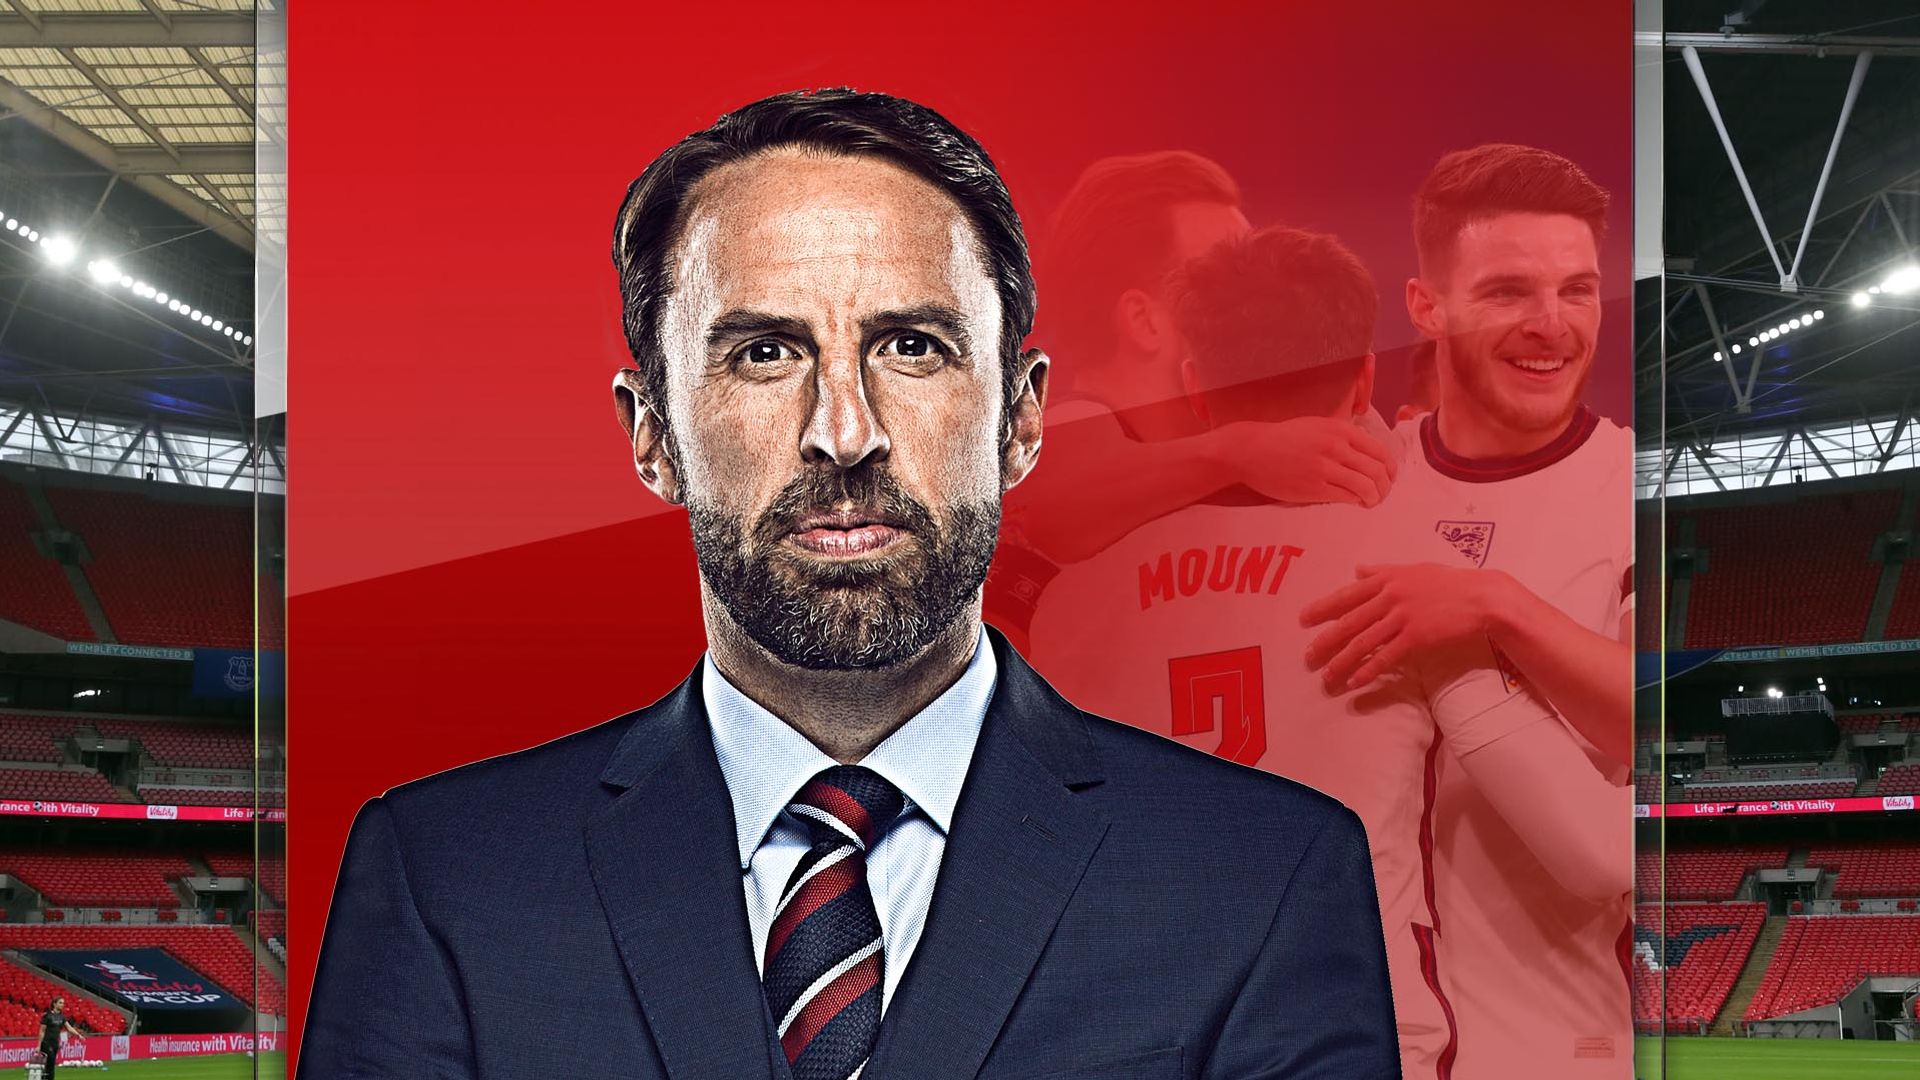 Questions still for Southgate to answer